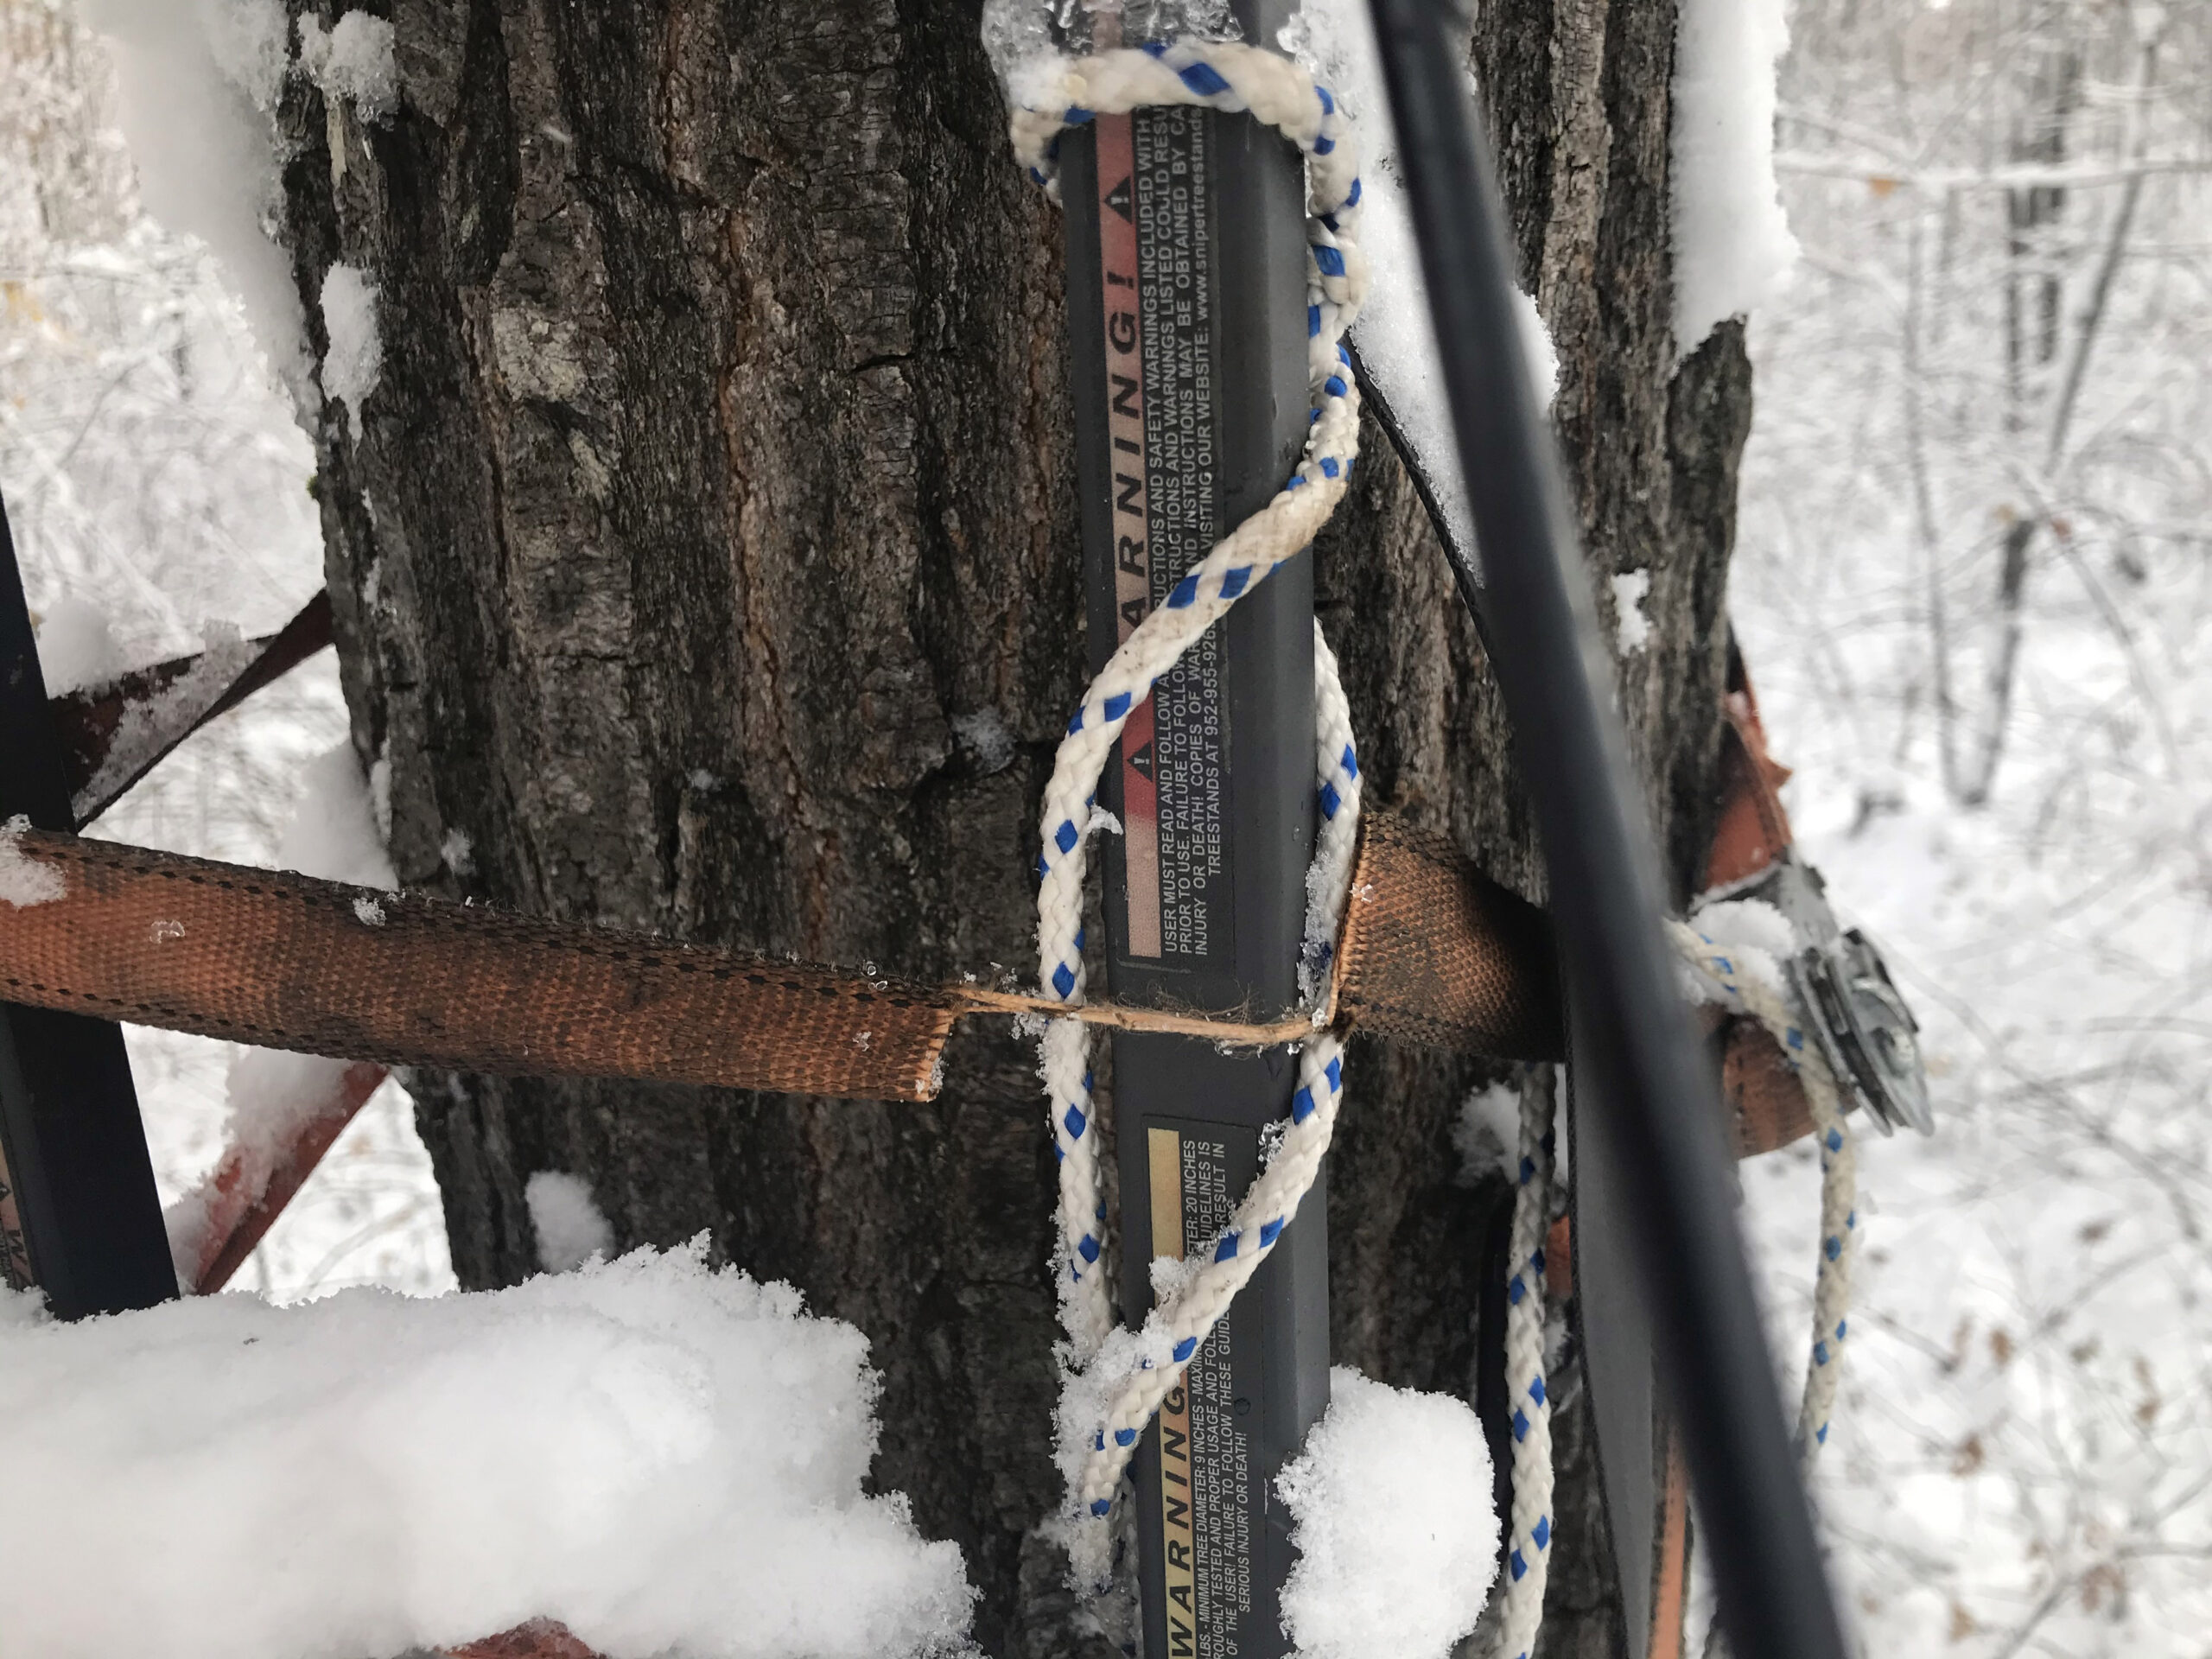 Hunter cuts tree stand straps sabotage other hunter